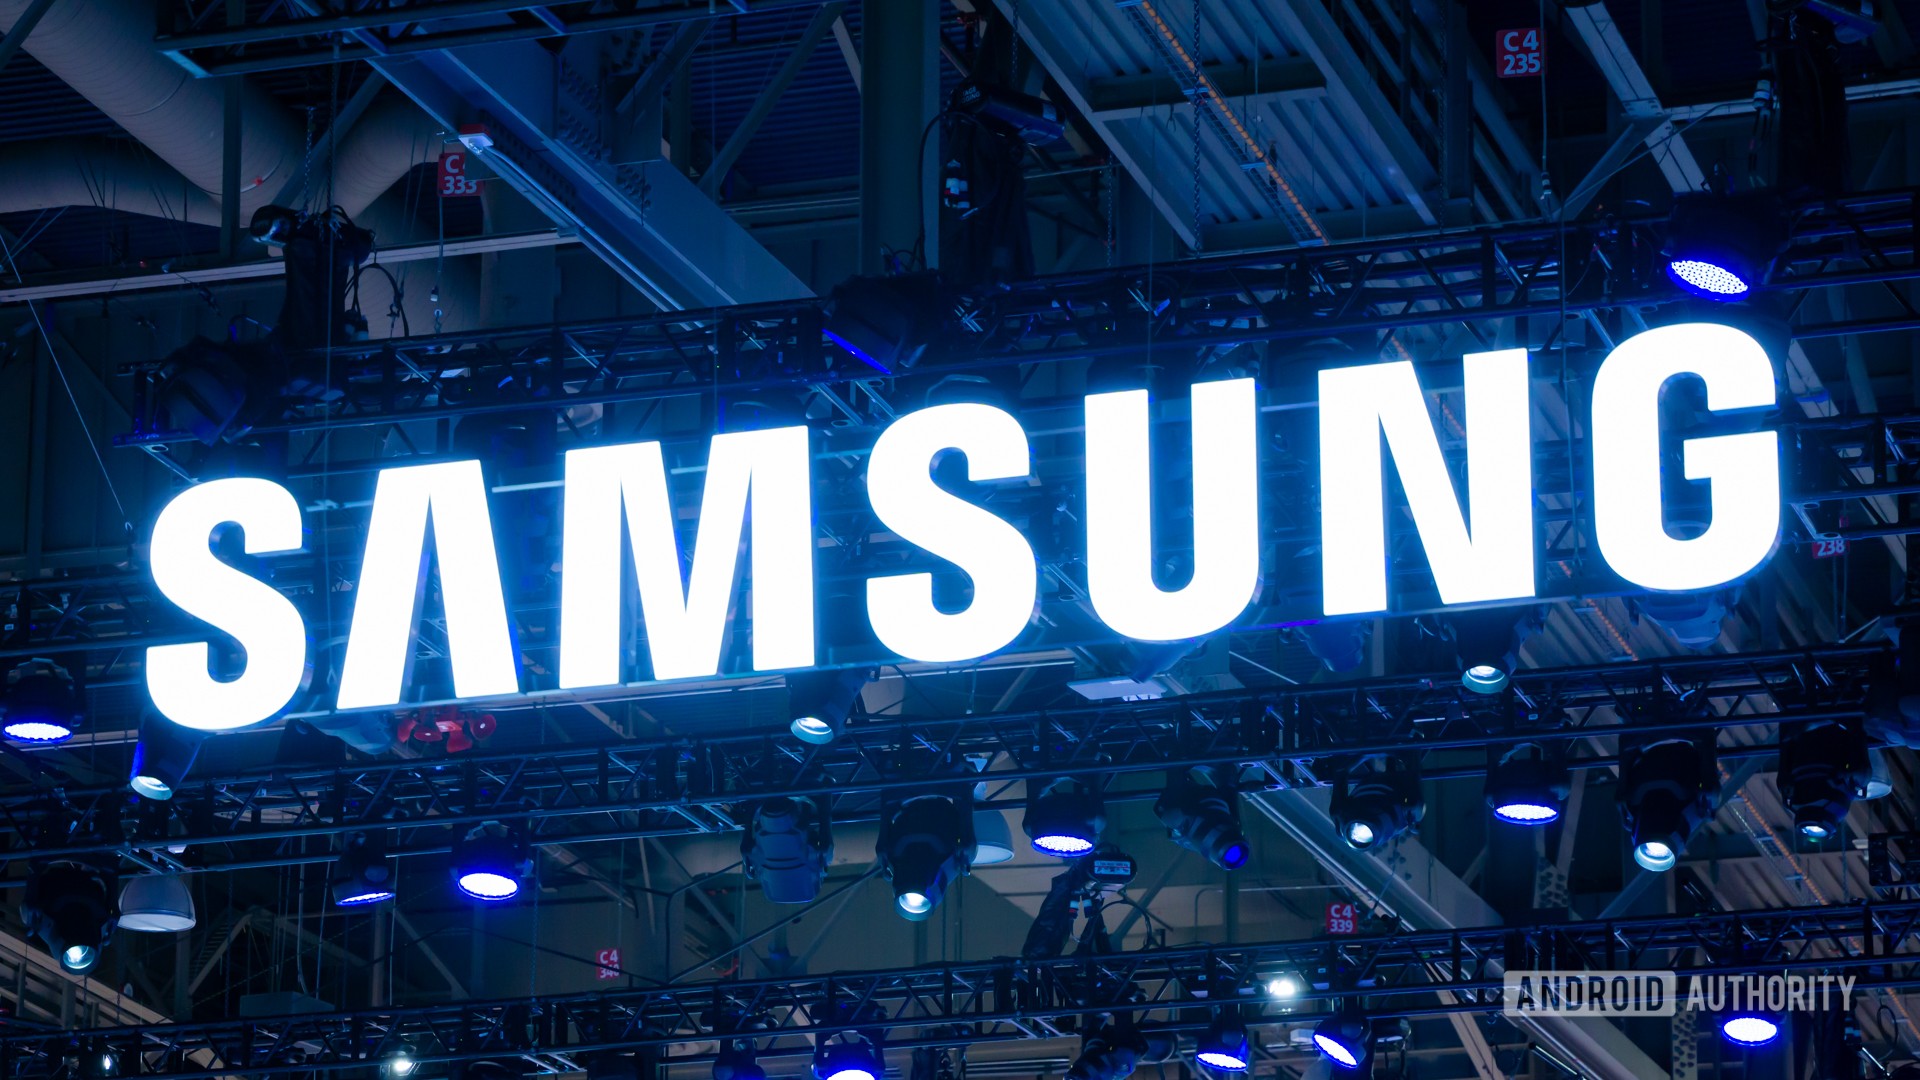 Samsung’s next big Unpacked event could take place on July 10